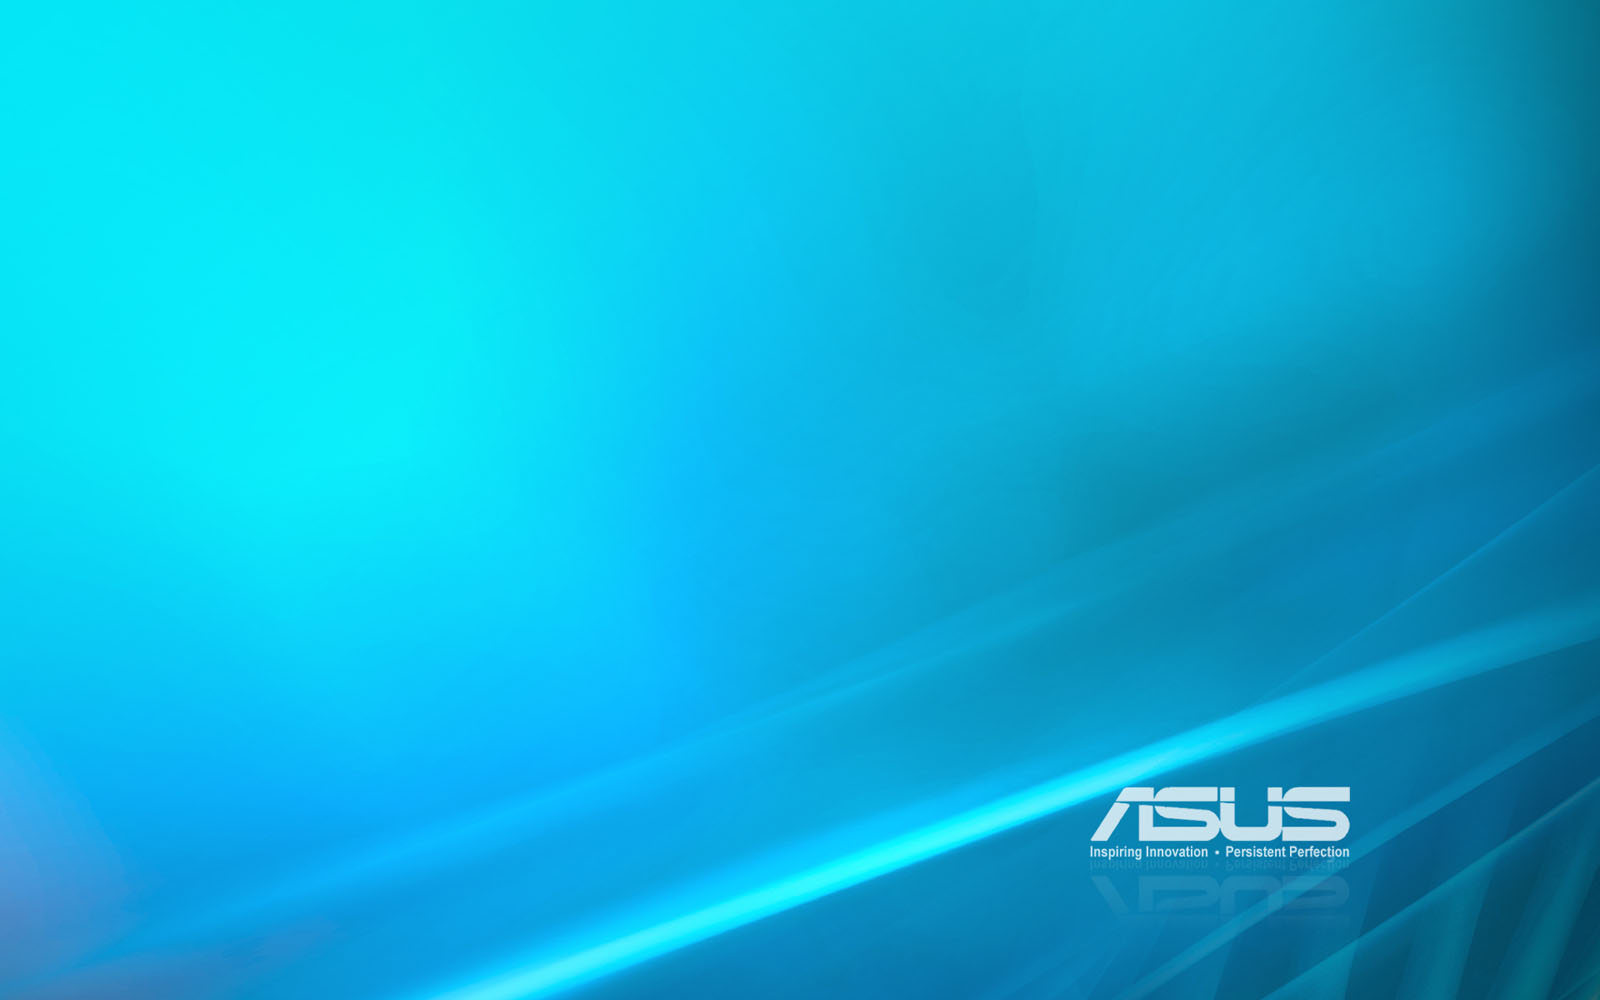  asus wallpapers asus desktop wallpapers asus desktop backgrounds asus 1600x1000